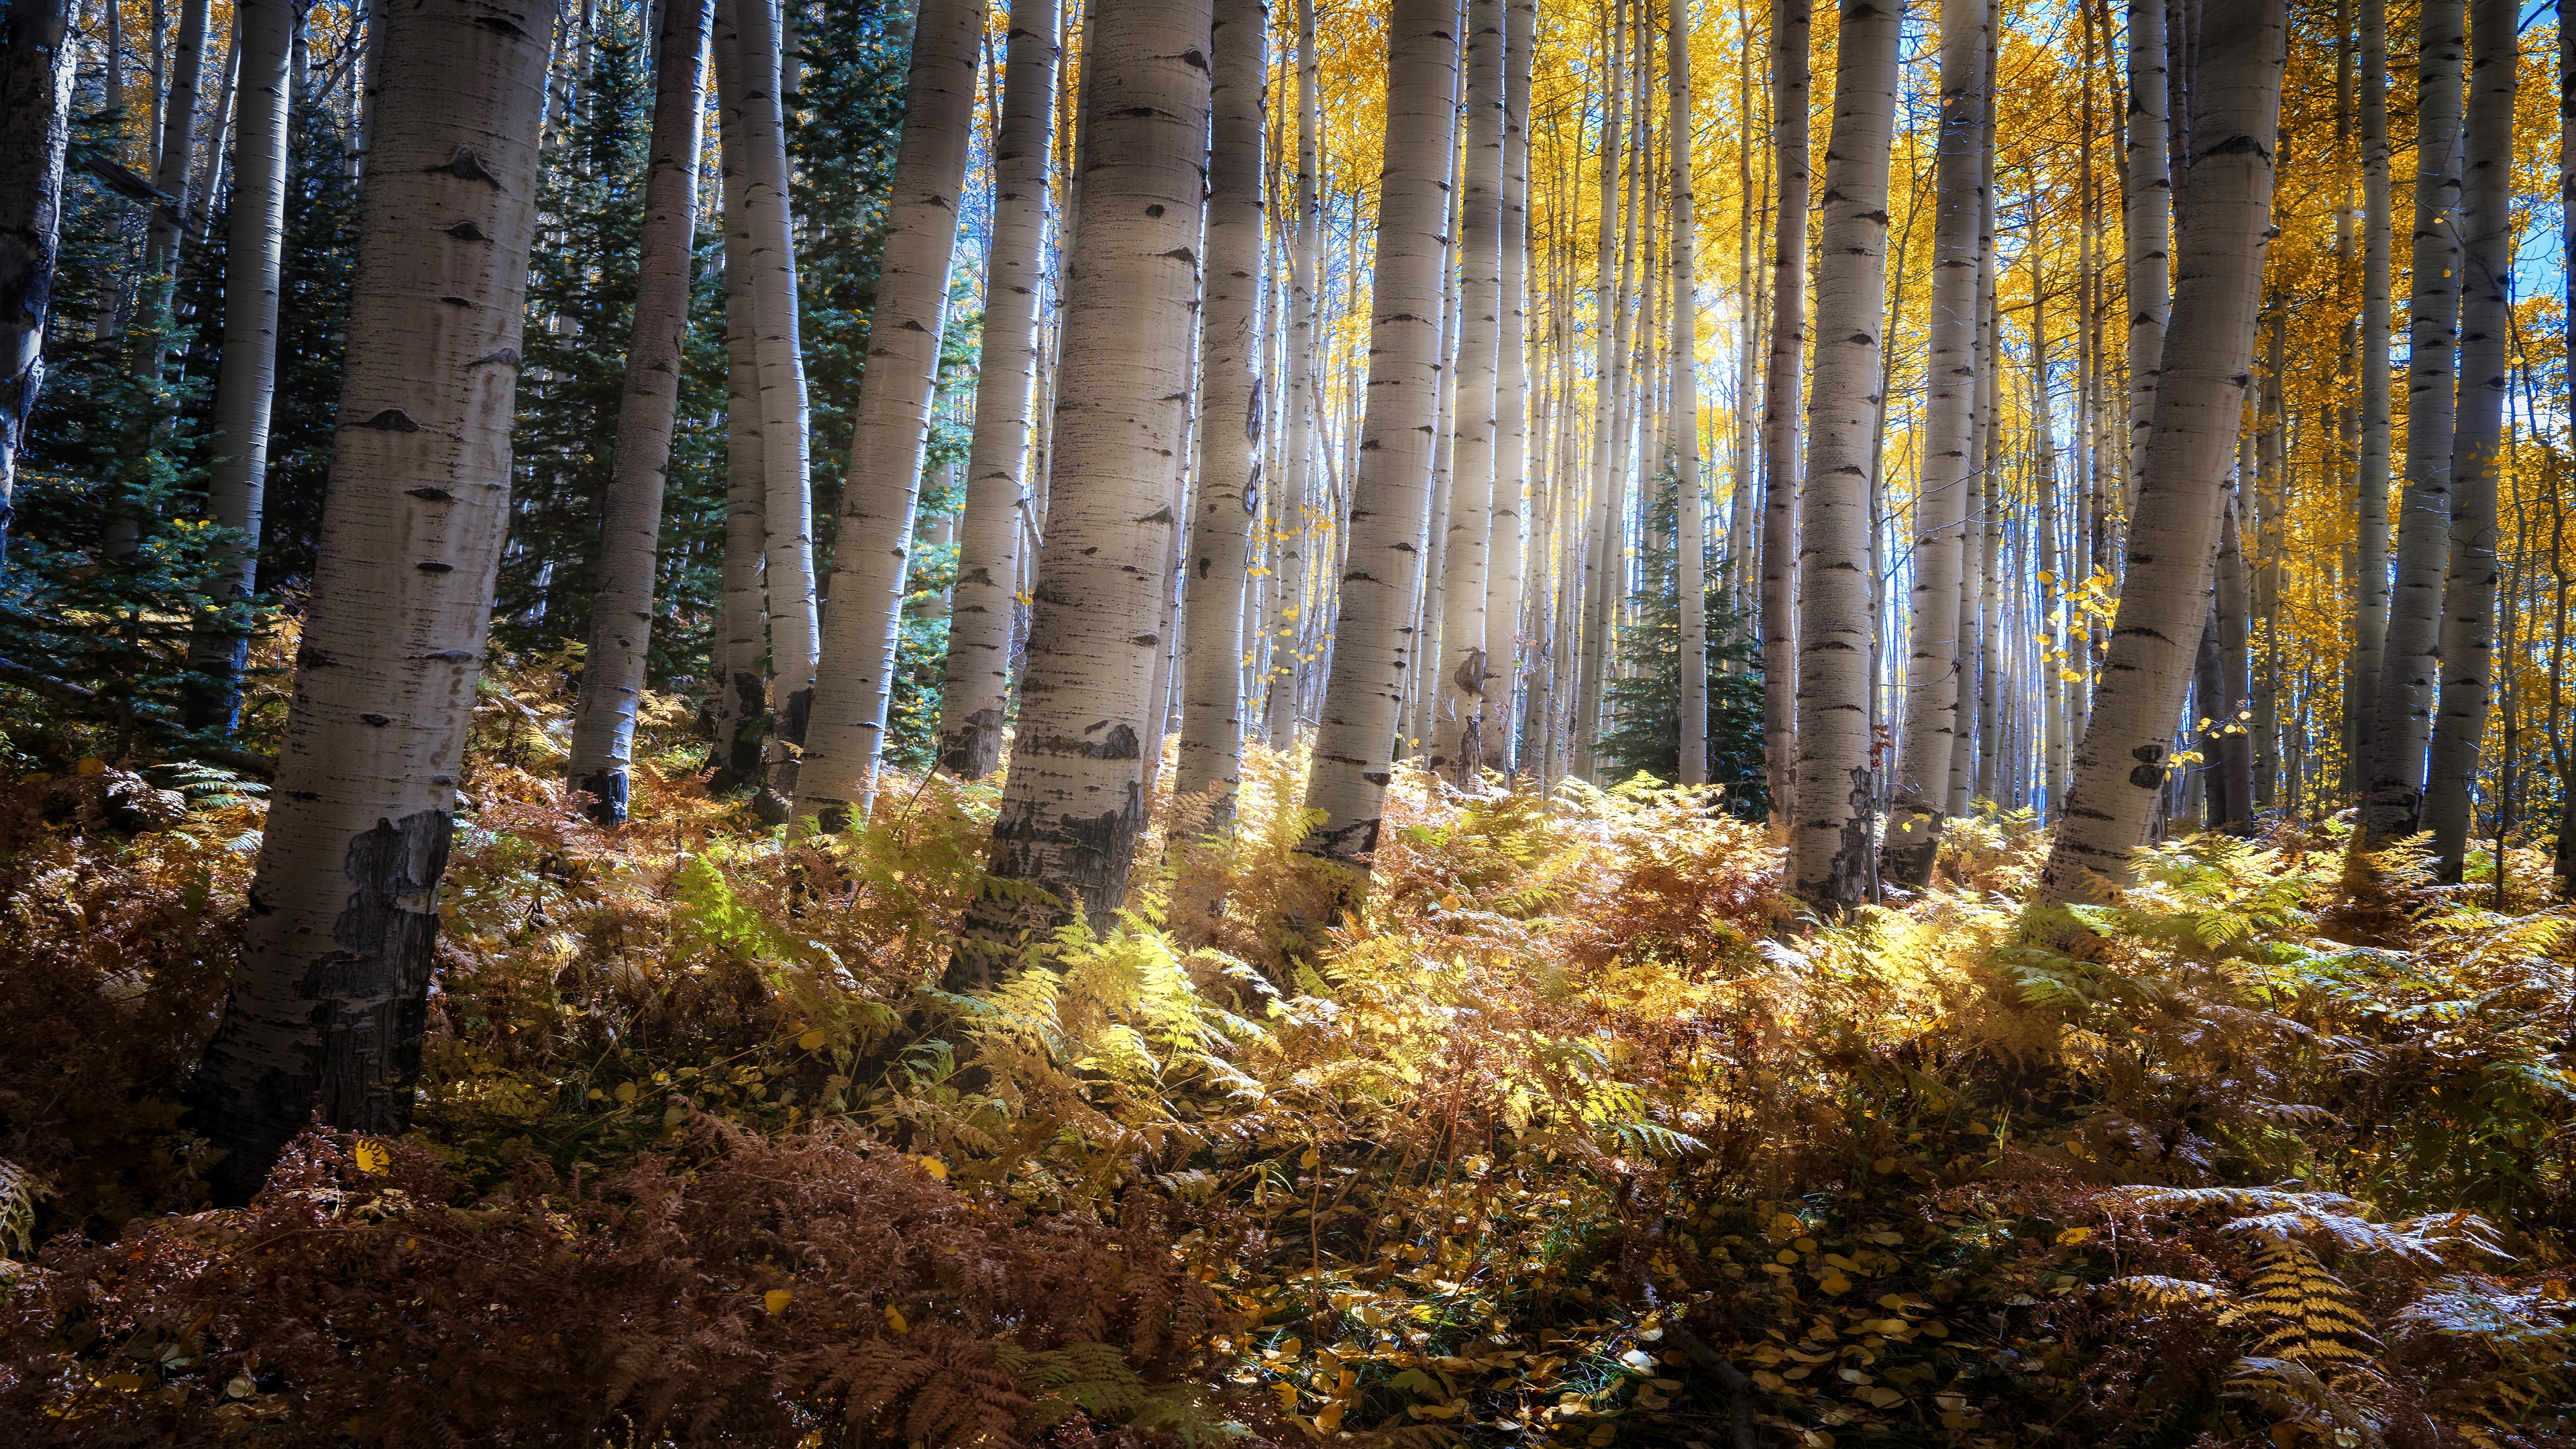 General 3840x2160 nature forest trees sunlight fall